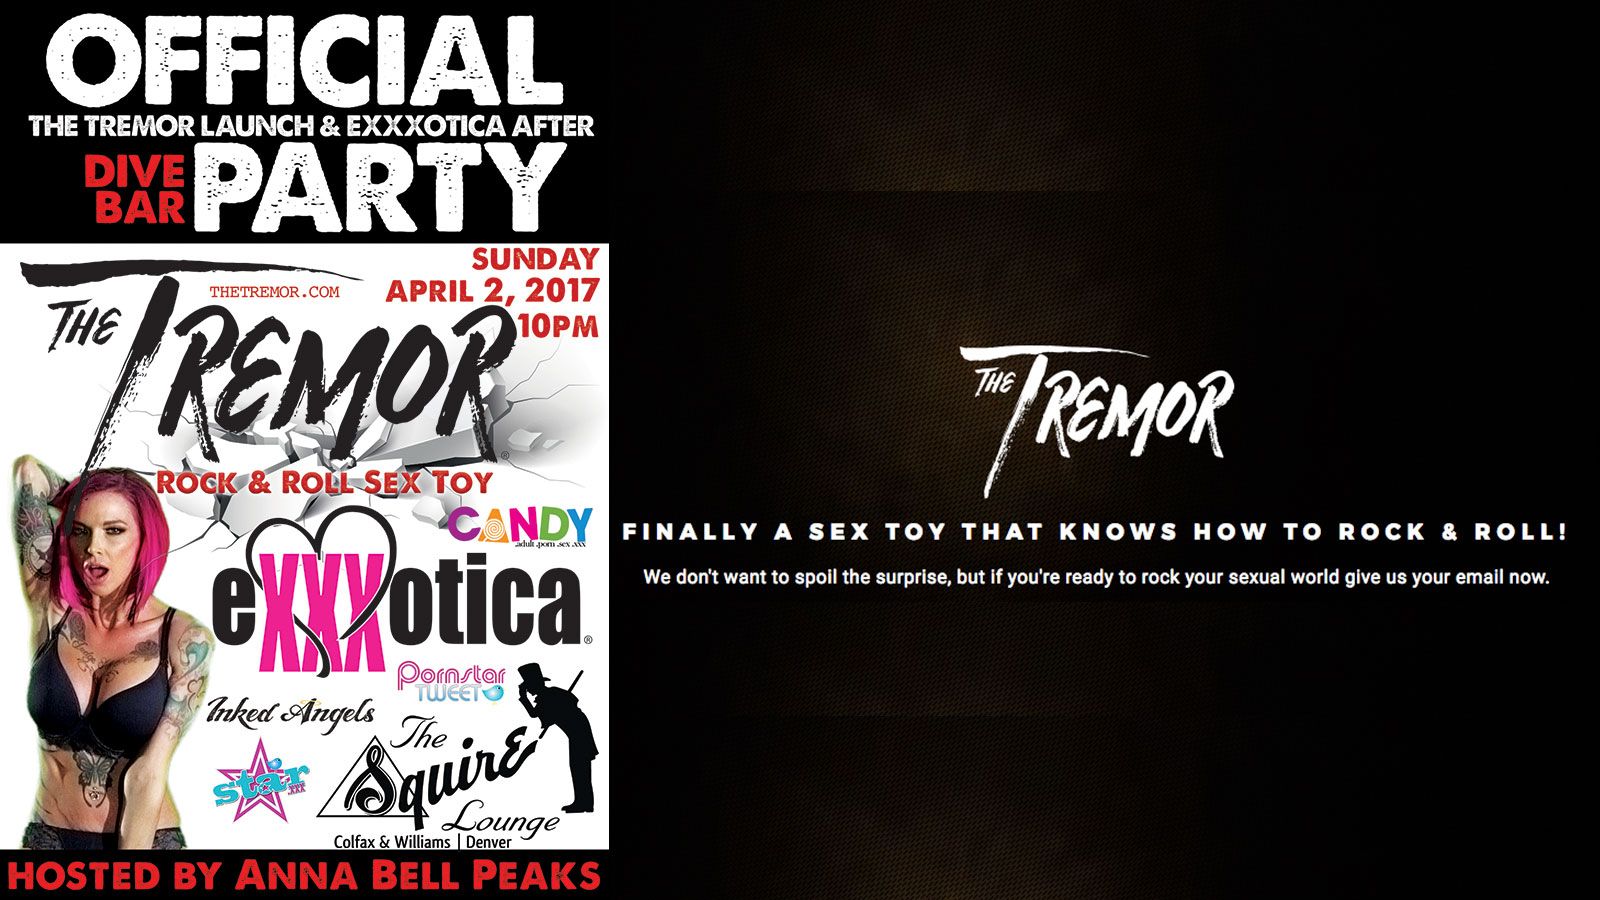 Sex Toy The Tremor To Host Exxxotica Denver Post-Show Party